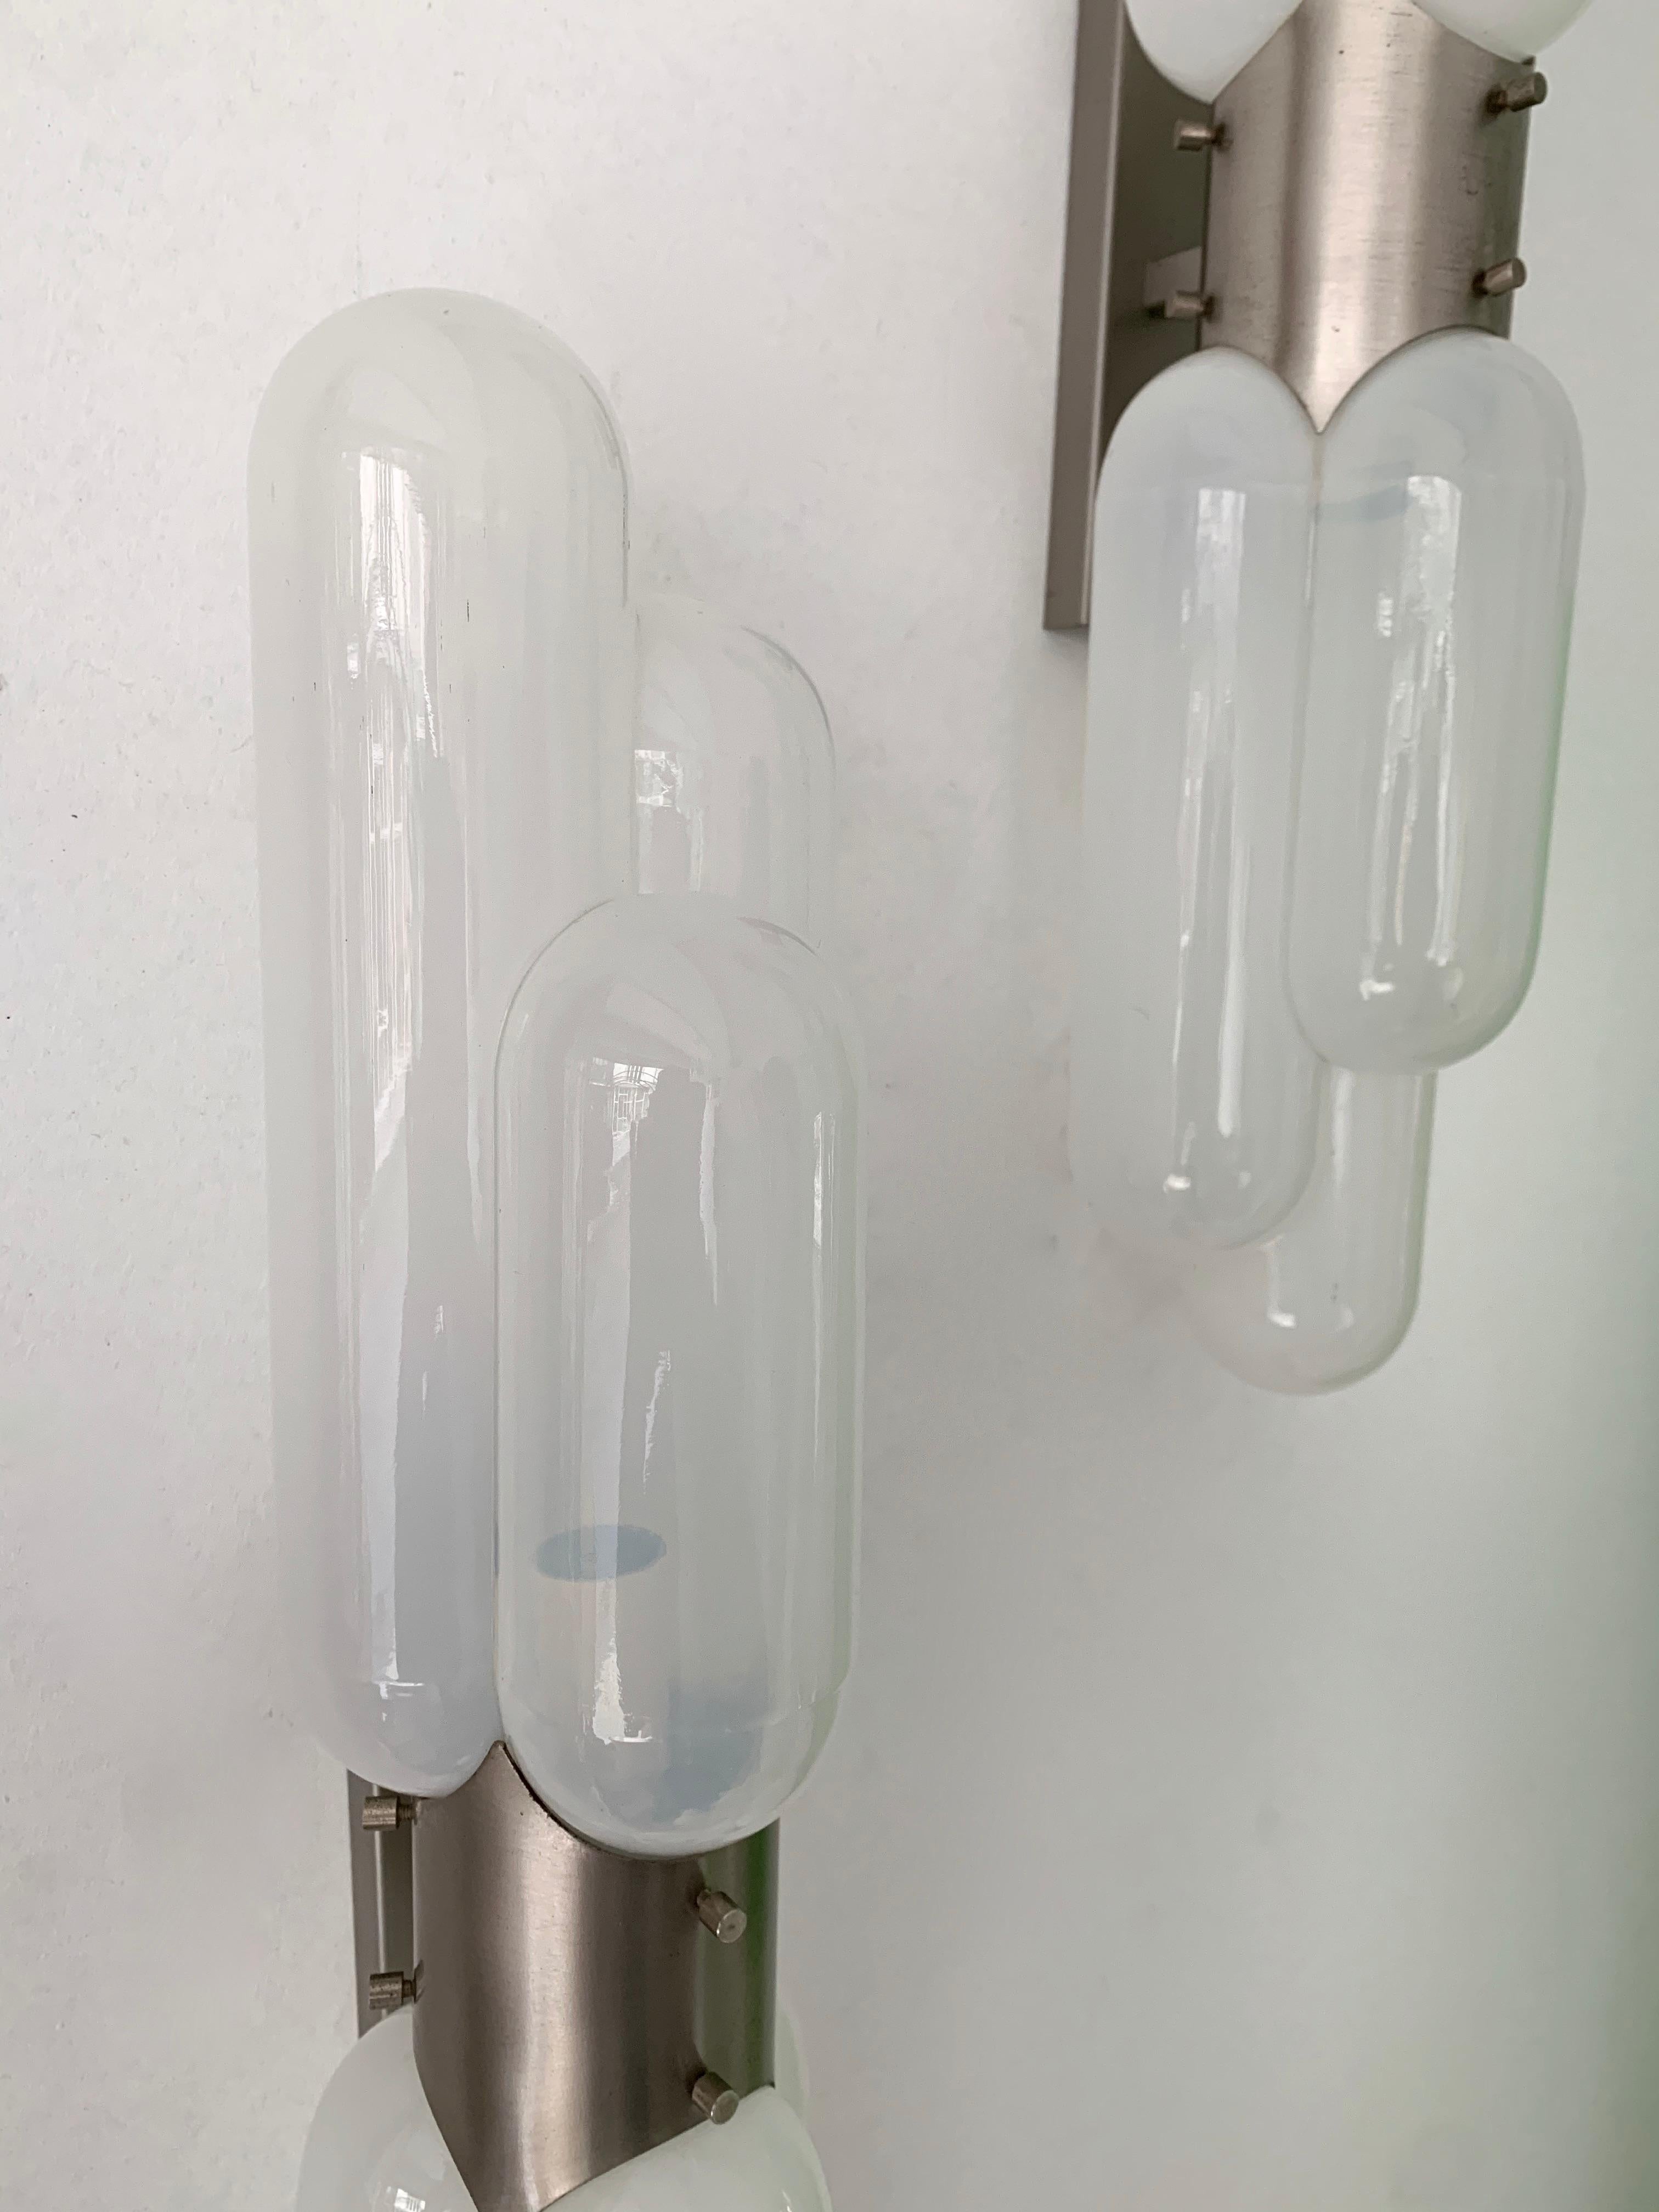 Pair of gellule torpedo wall lamps lights sconces by Carlo Nason for the manufacture Mazzega, blown Murano glass, silver nickeled structure. Famous manufacture like Venini, Vistosi, La Murrina, VeArt, Seguso, Poliarte.